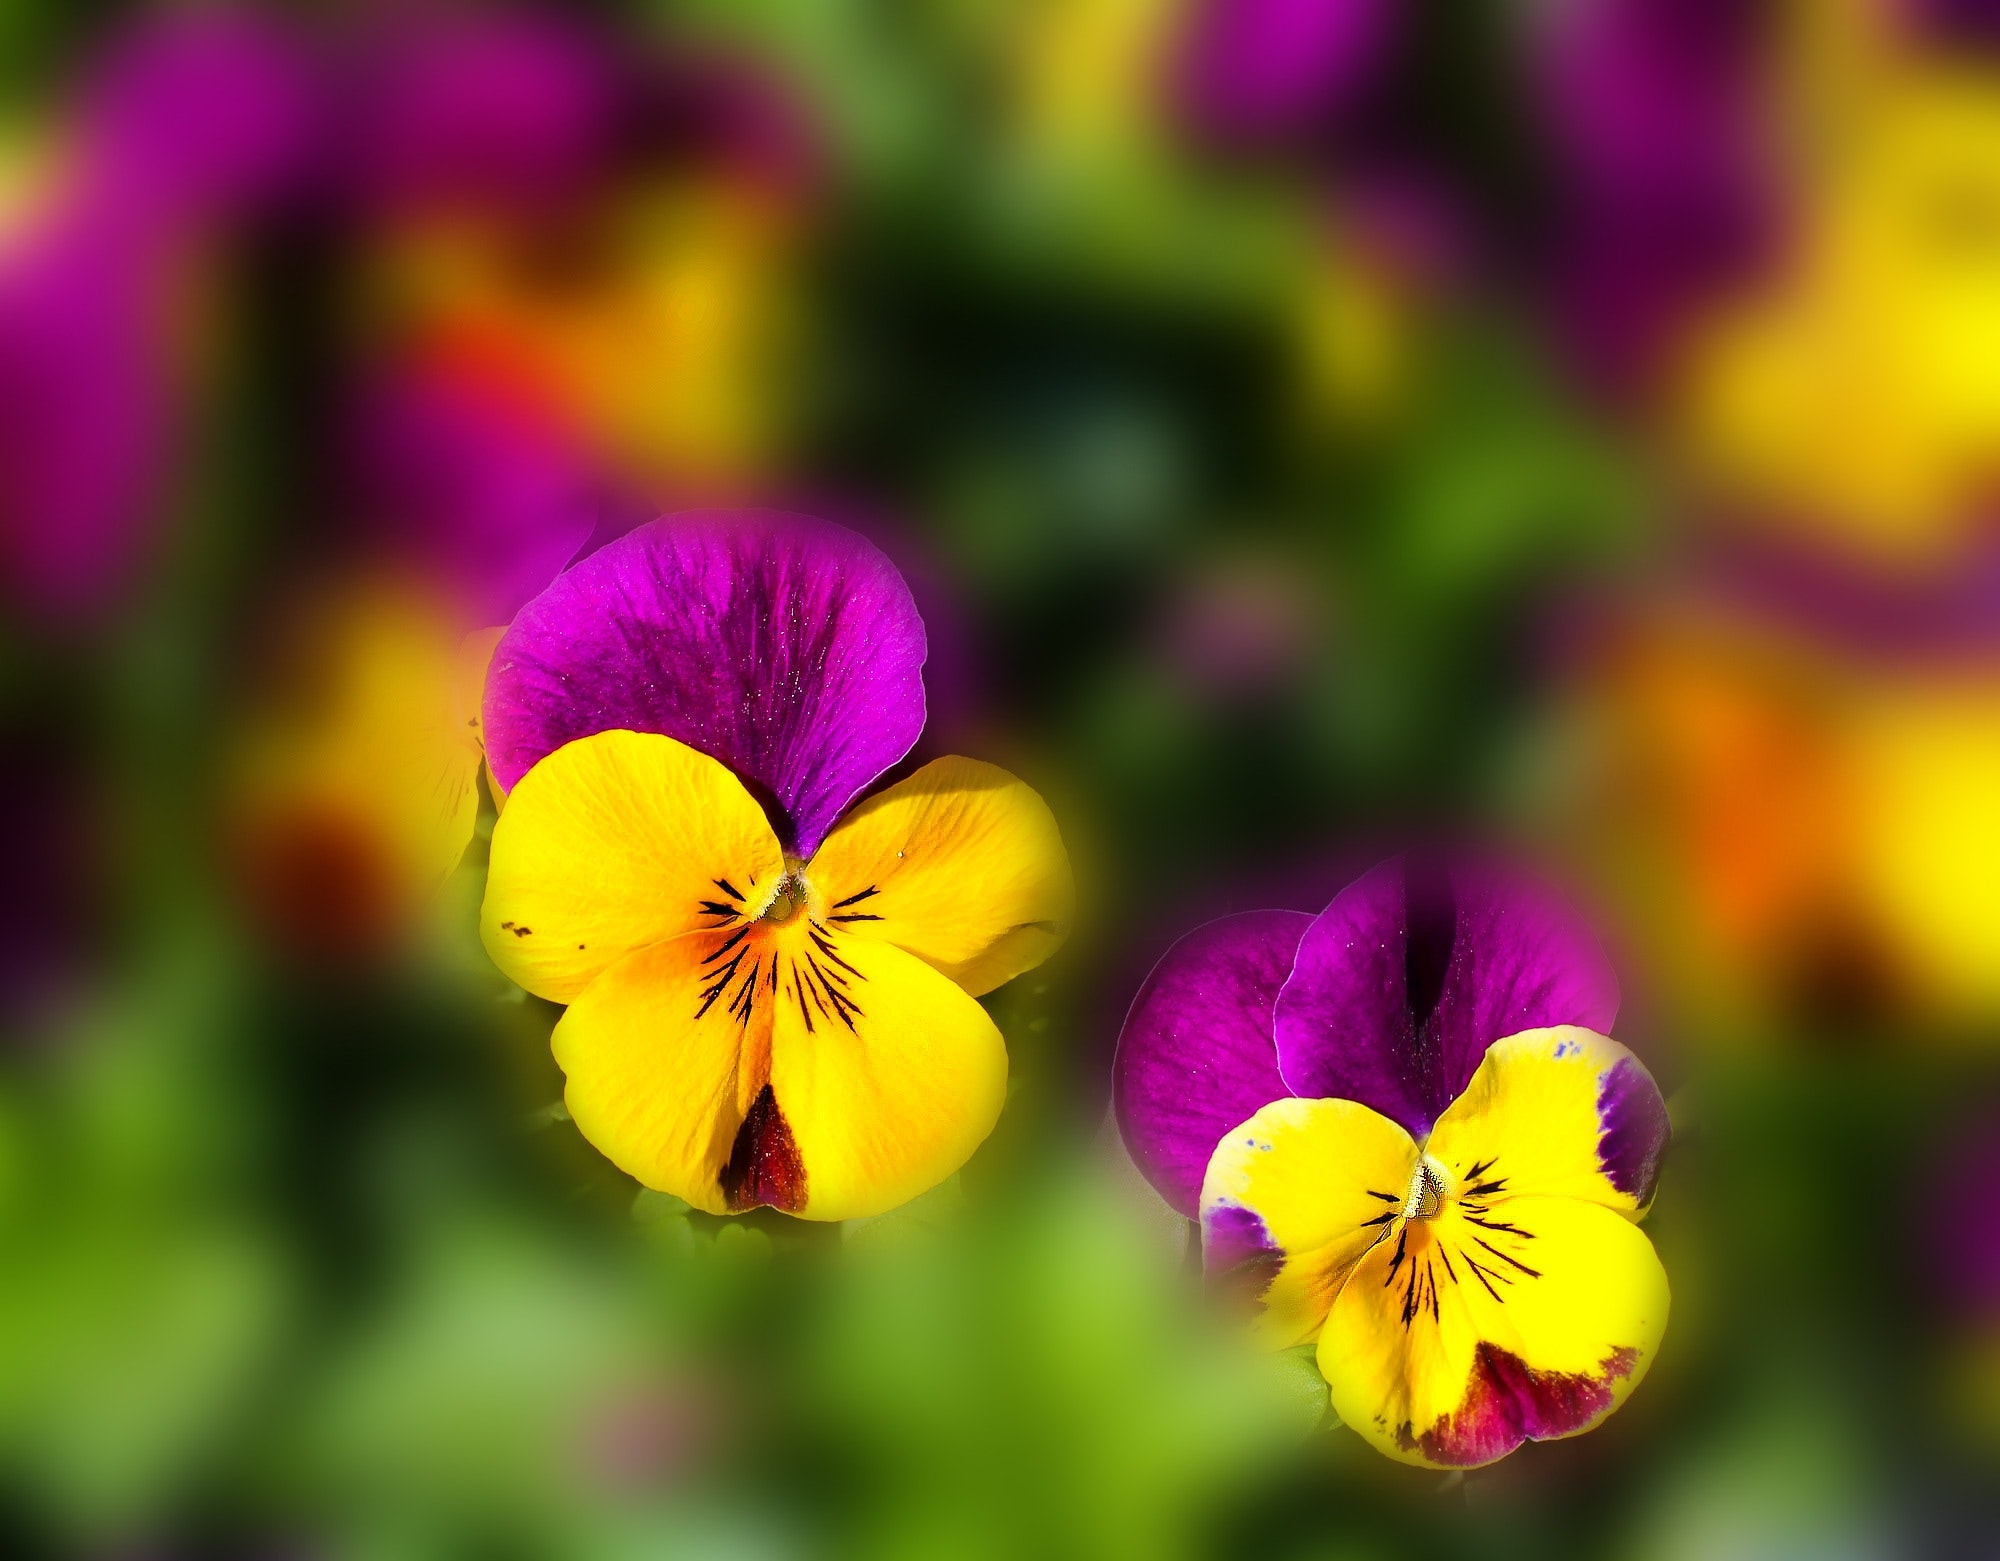 Pansy Care: How To Plant, Grow And Care For Pansies